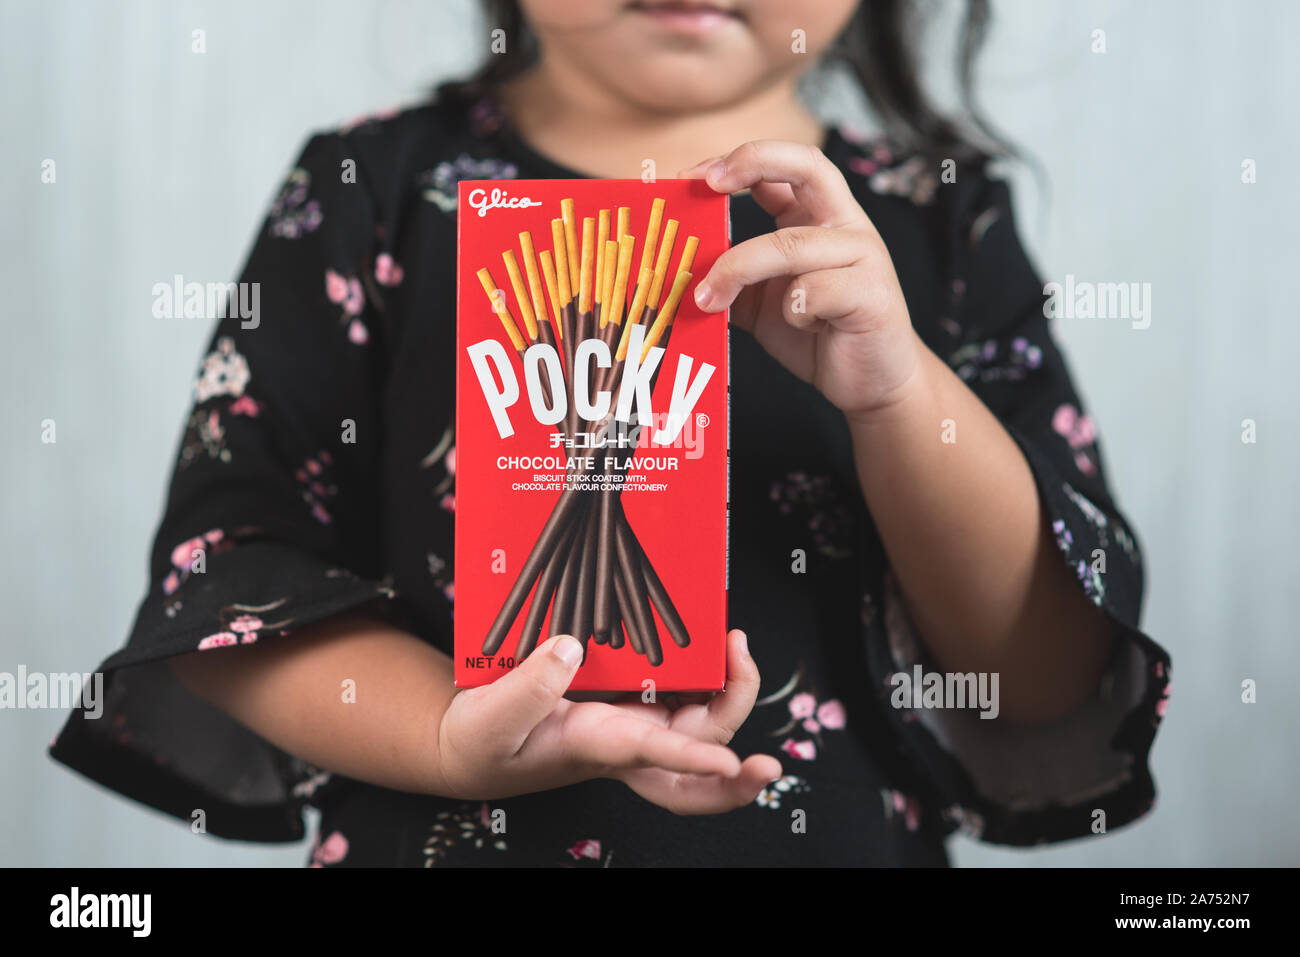 Petaling jaya, Selangor, Malaysia - 20 Oktober 2019 : Little asian girl holding a box of pocky brand of chocolate sticks. Pocky is a famous confection Stock Photo